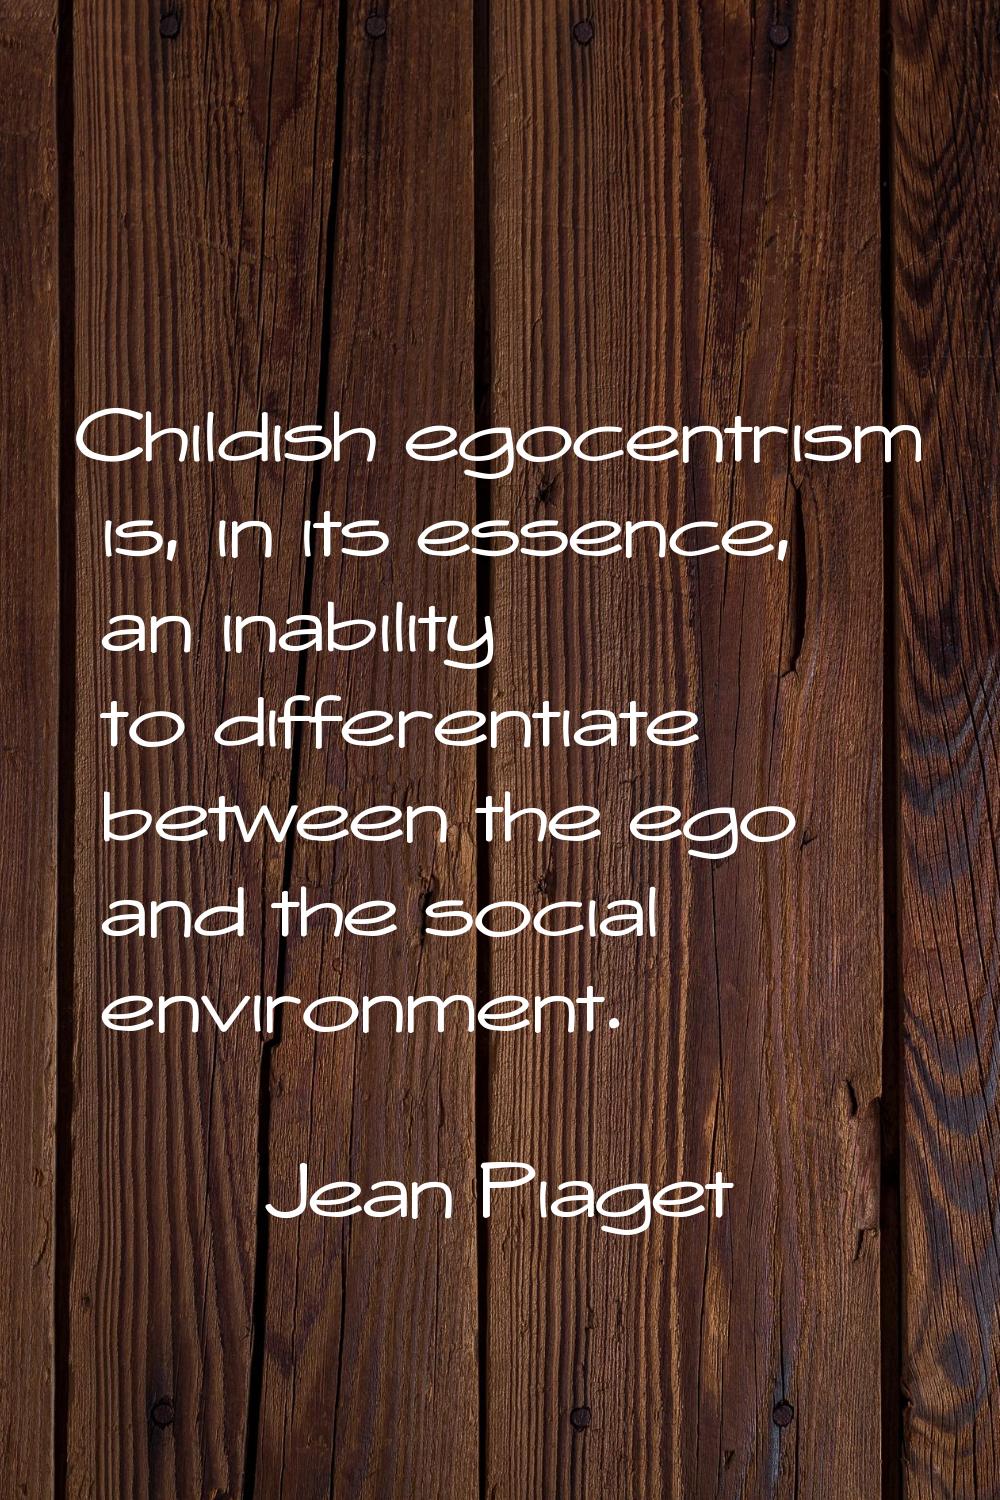 Childish egocentrism is, in its essence, an inability to differentiate between the ego and the soci